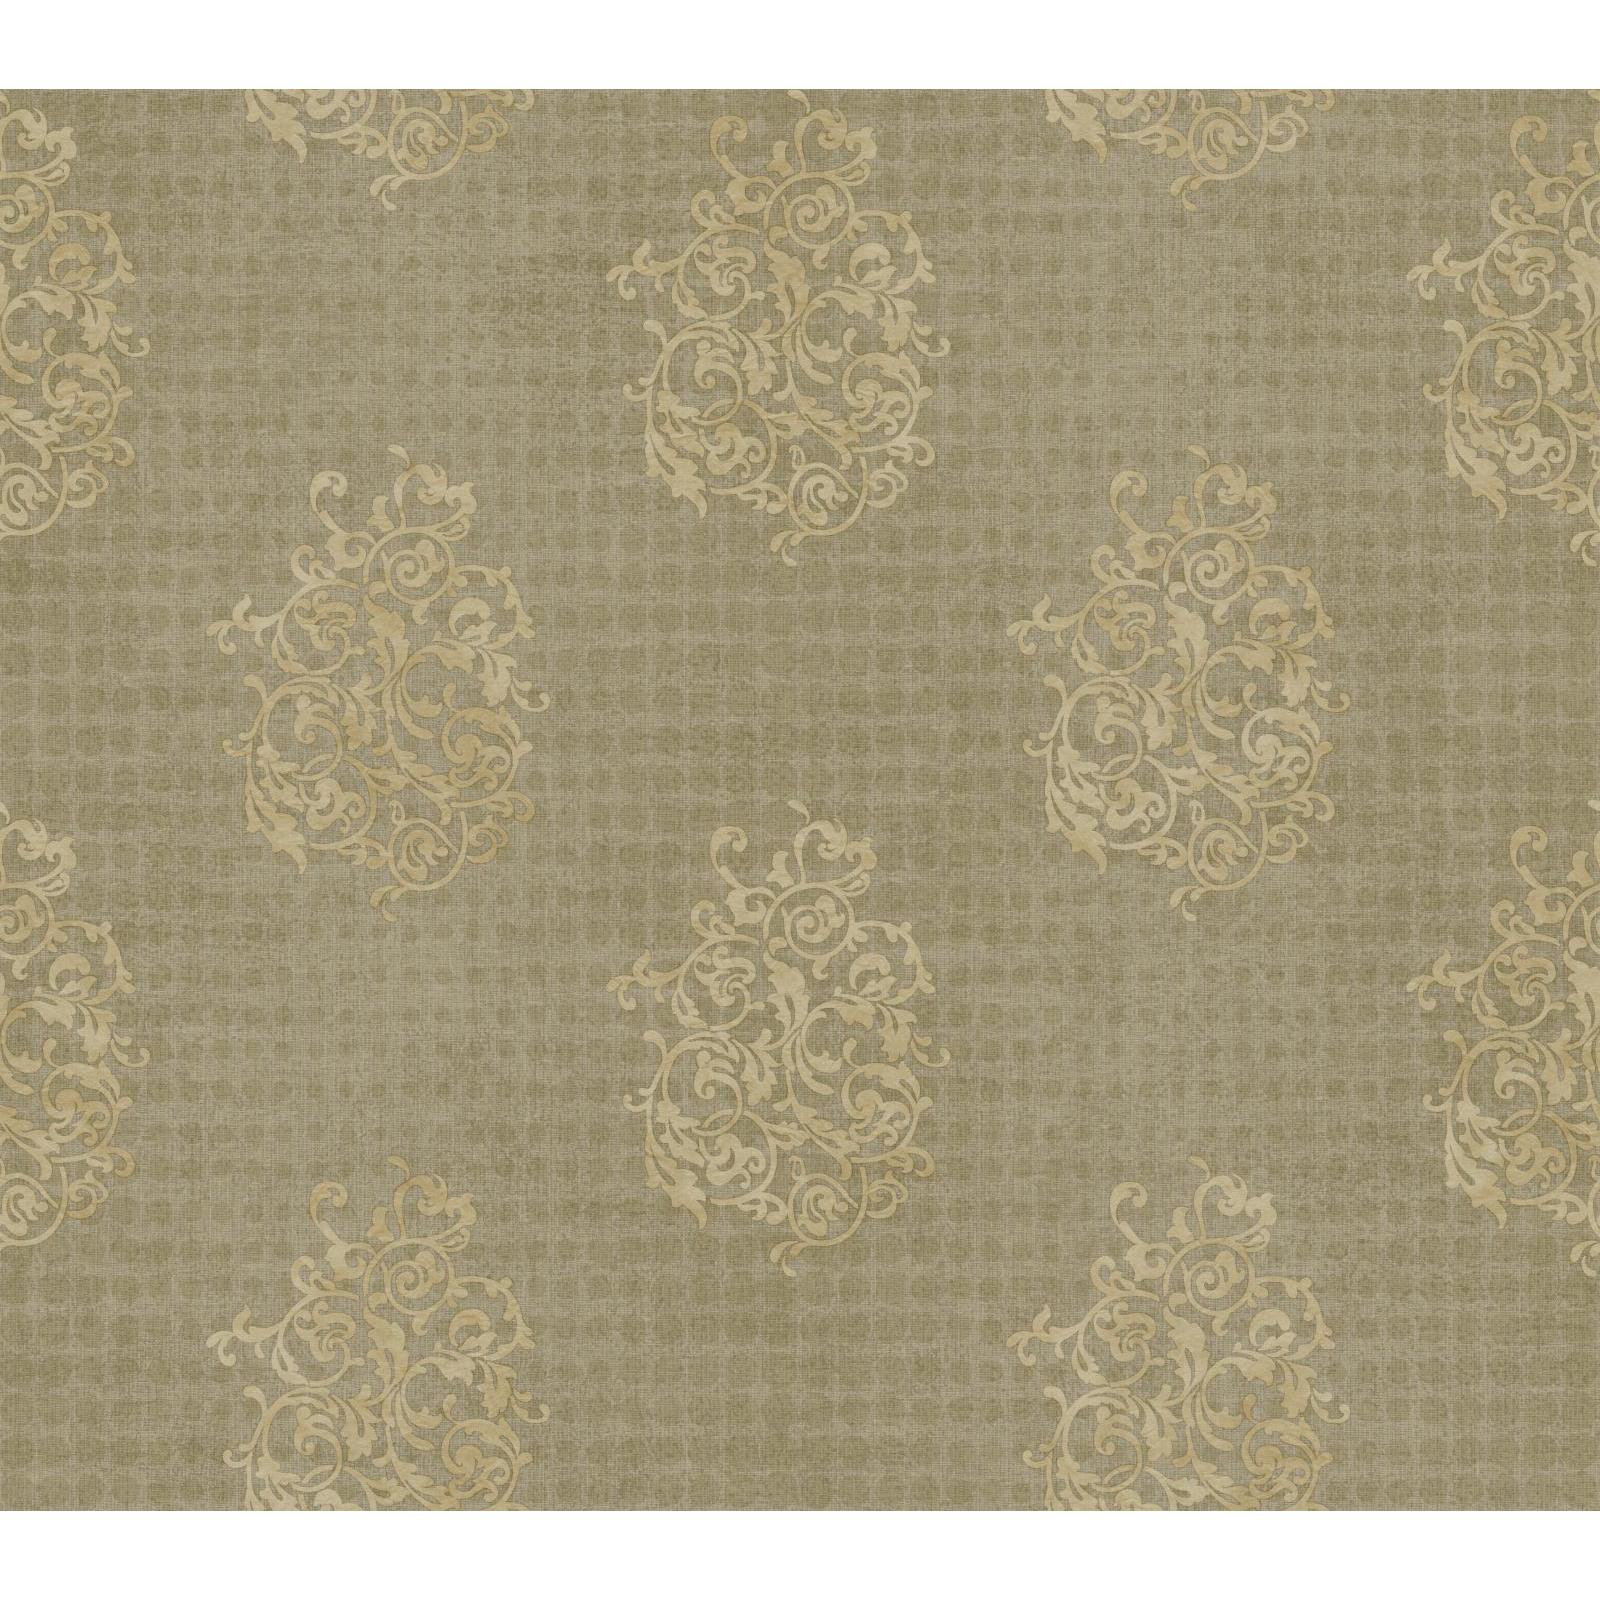 York Wallcoverings Metallics  Biscayne Wallpaper in Oyster Pearl Metallic, White, Bisque